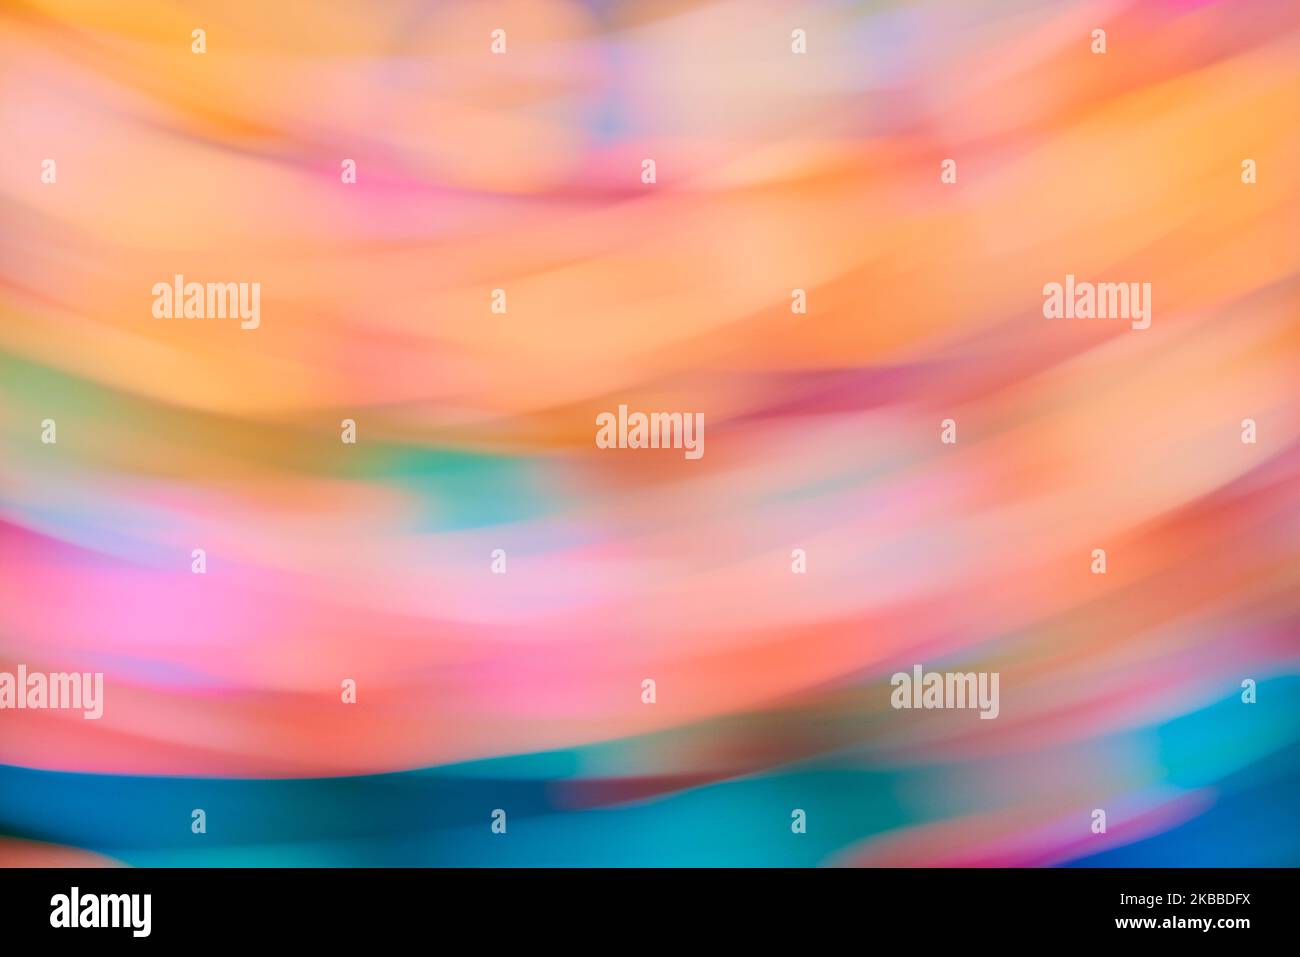 Abstract delicate background in soft pastel colors, fluid dynamic design with colourful lights in spin motion. Stock Photo